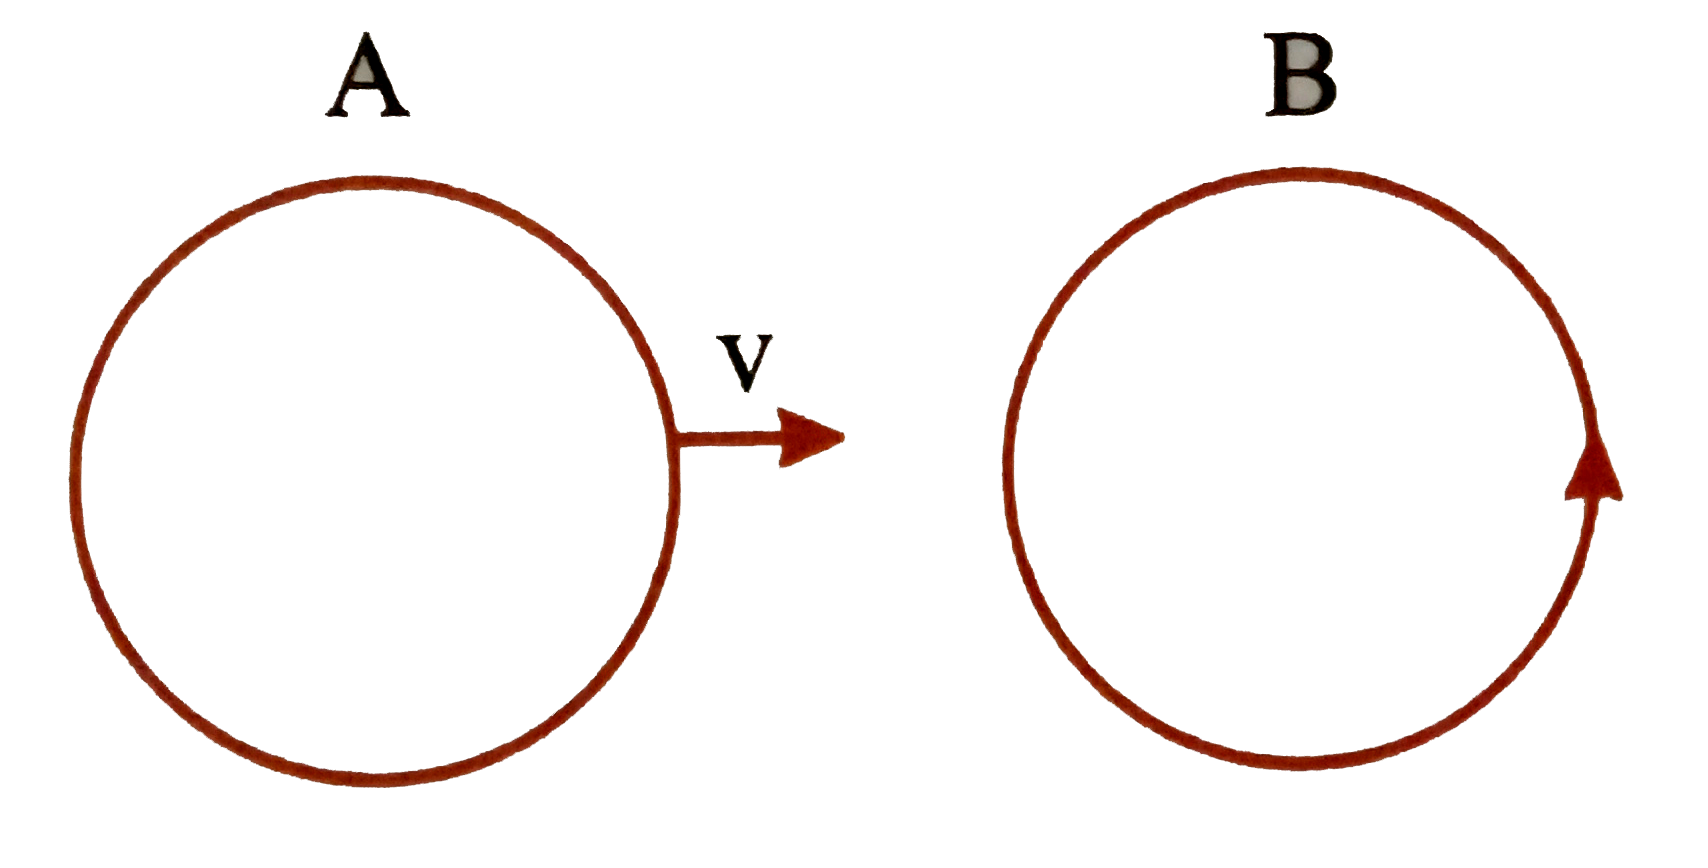 There are two coils A and B as shown in Figure. A current starts flowing in B as shown, when A is moved towards B and stops when A stops moving. The current in B is counterclockwise. B is kept stationary when A moves. We can infer that